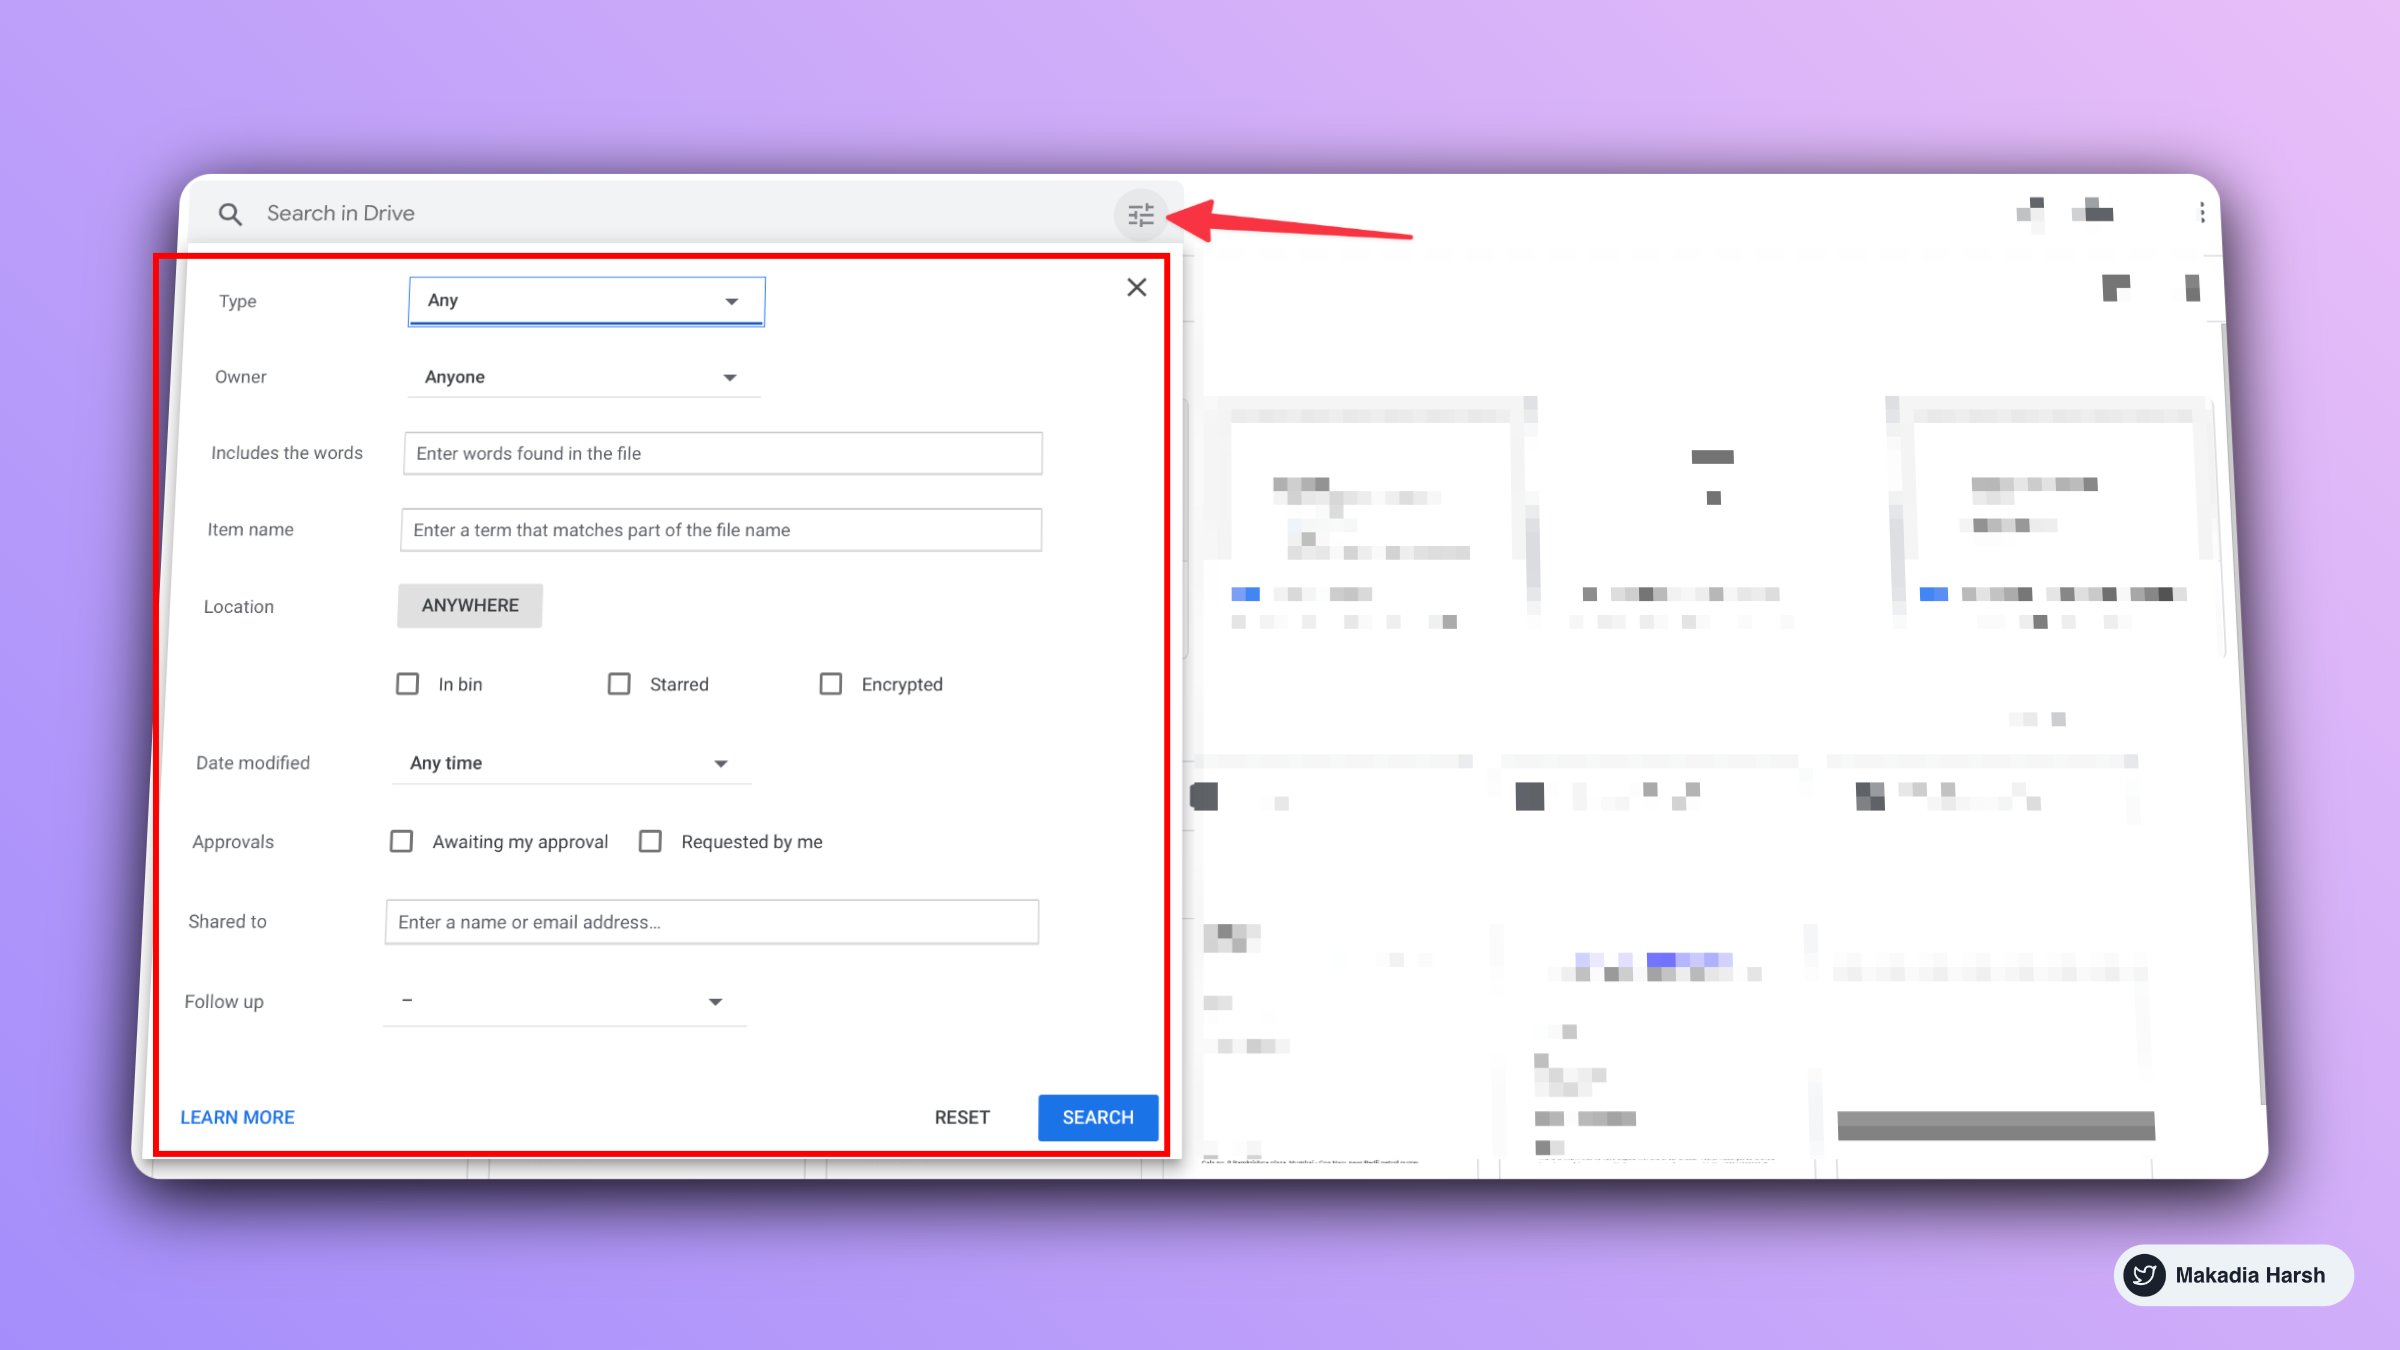 Google Drive’s advanced search tool enables users to filter searches based on the type of file, the owner of the file, the folder in which it is in, and its date of creation.